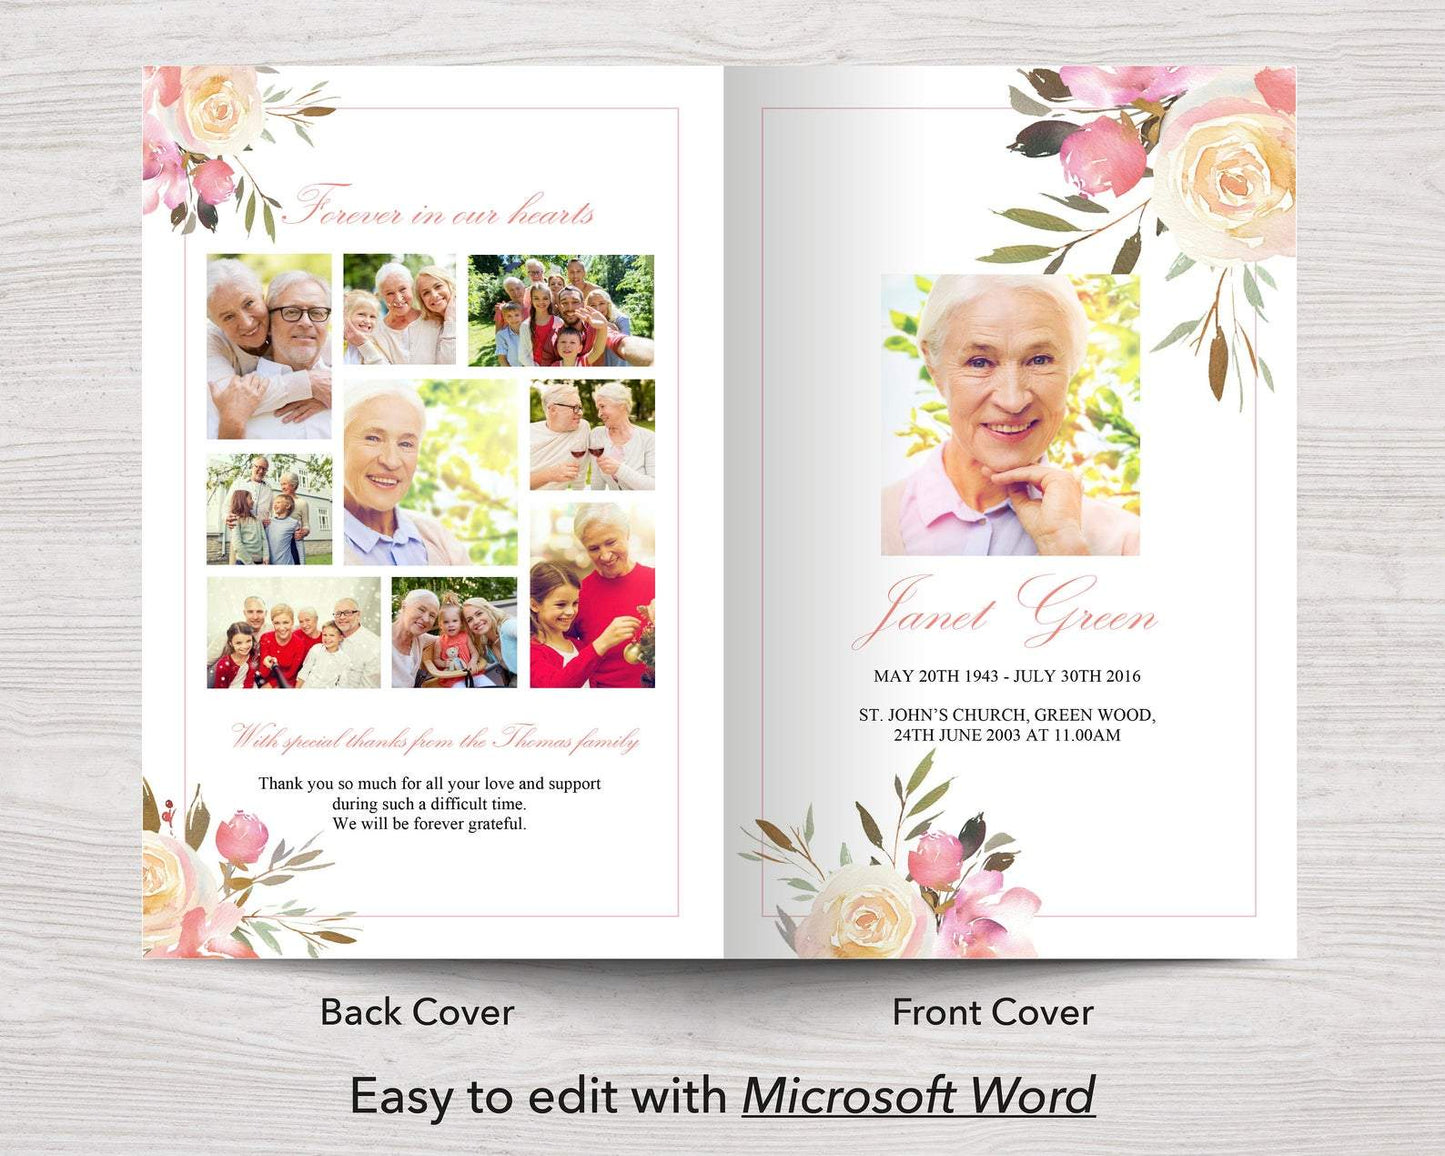 4 Page Spring Flowers Funeral Program Template